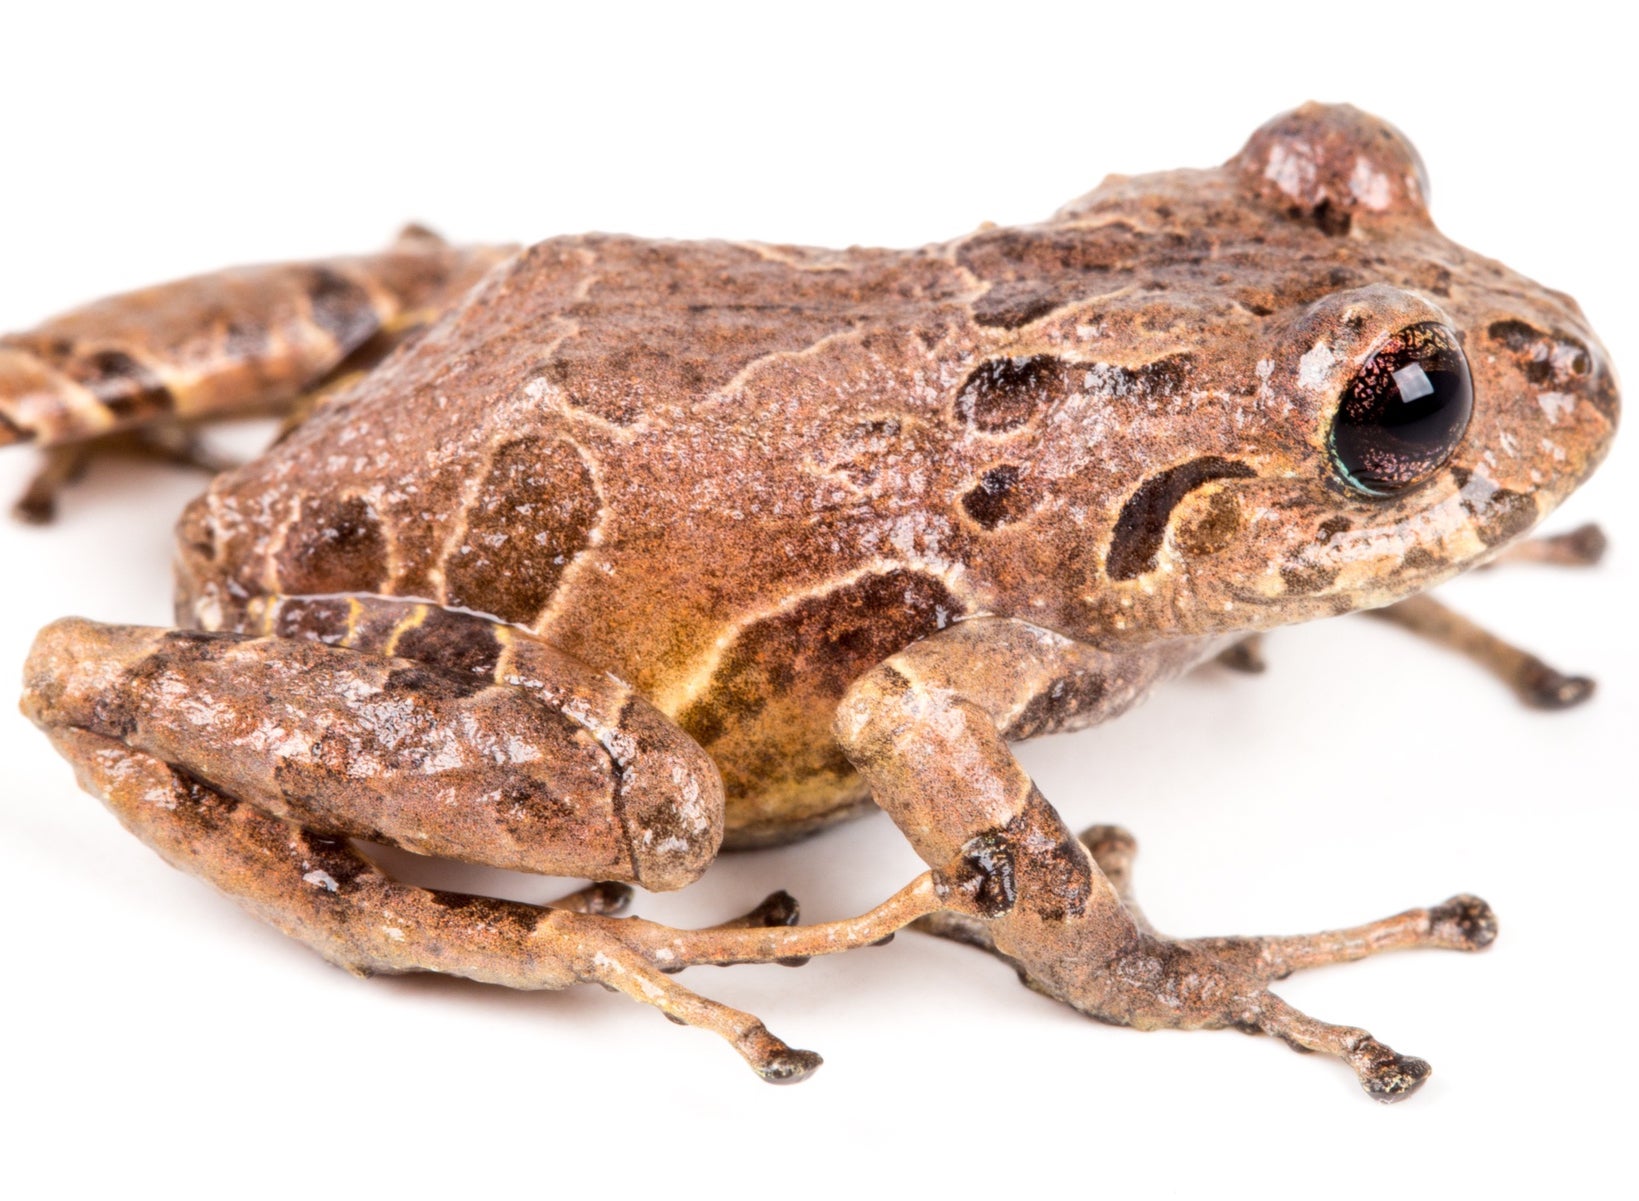 One of the six newly discovered species of rain frog in Ecuador – called ‘Pristimantis resistance’